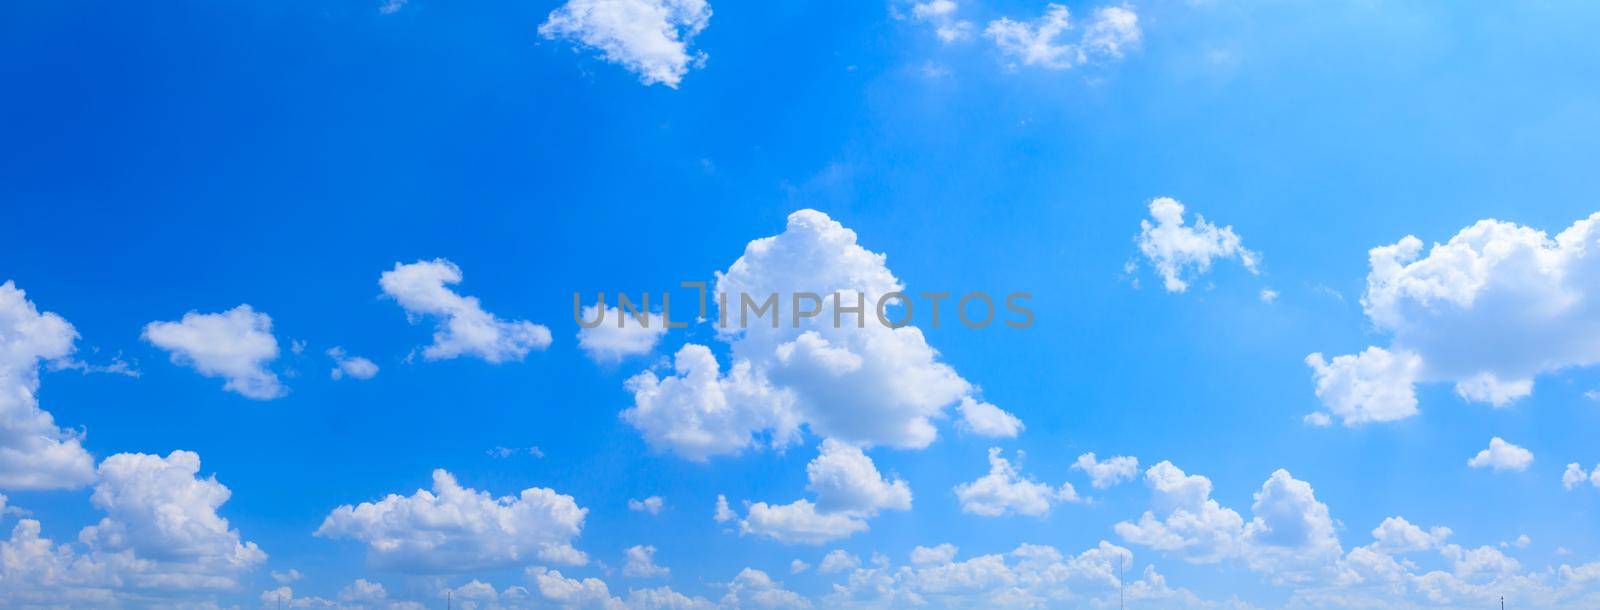 panoramic sky and cloud summertime beautiful background